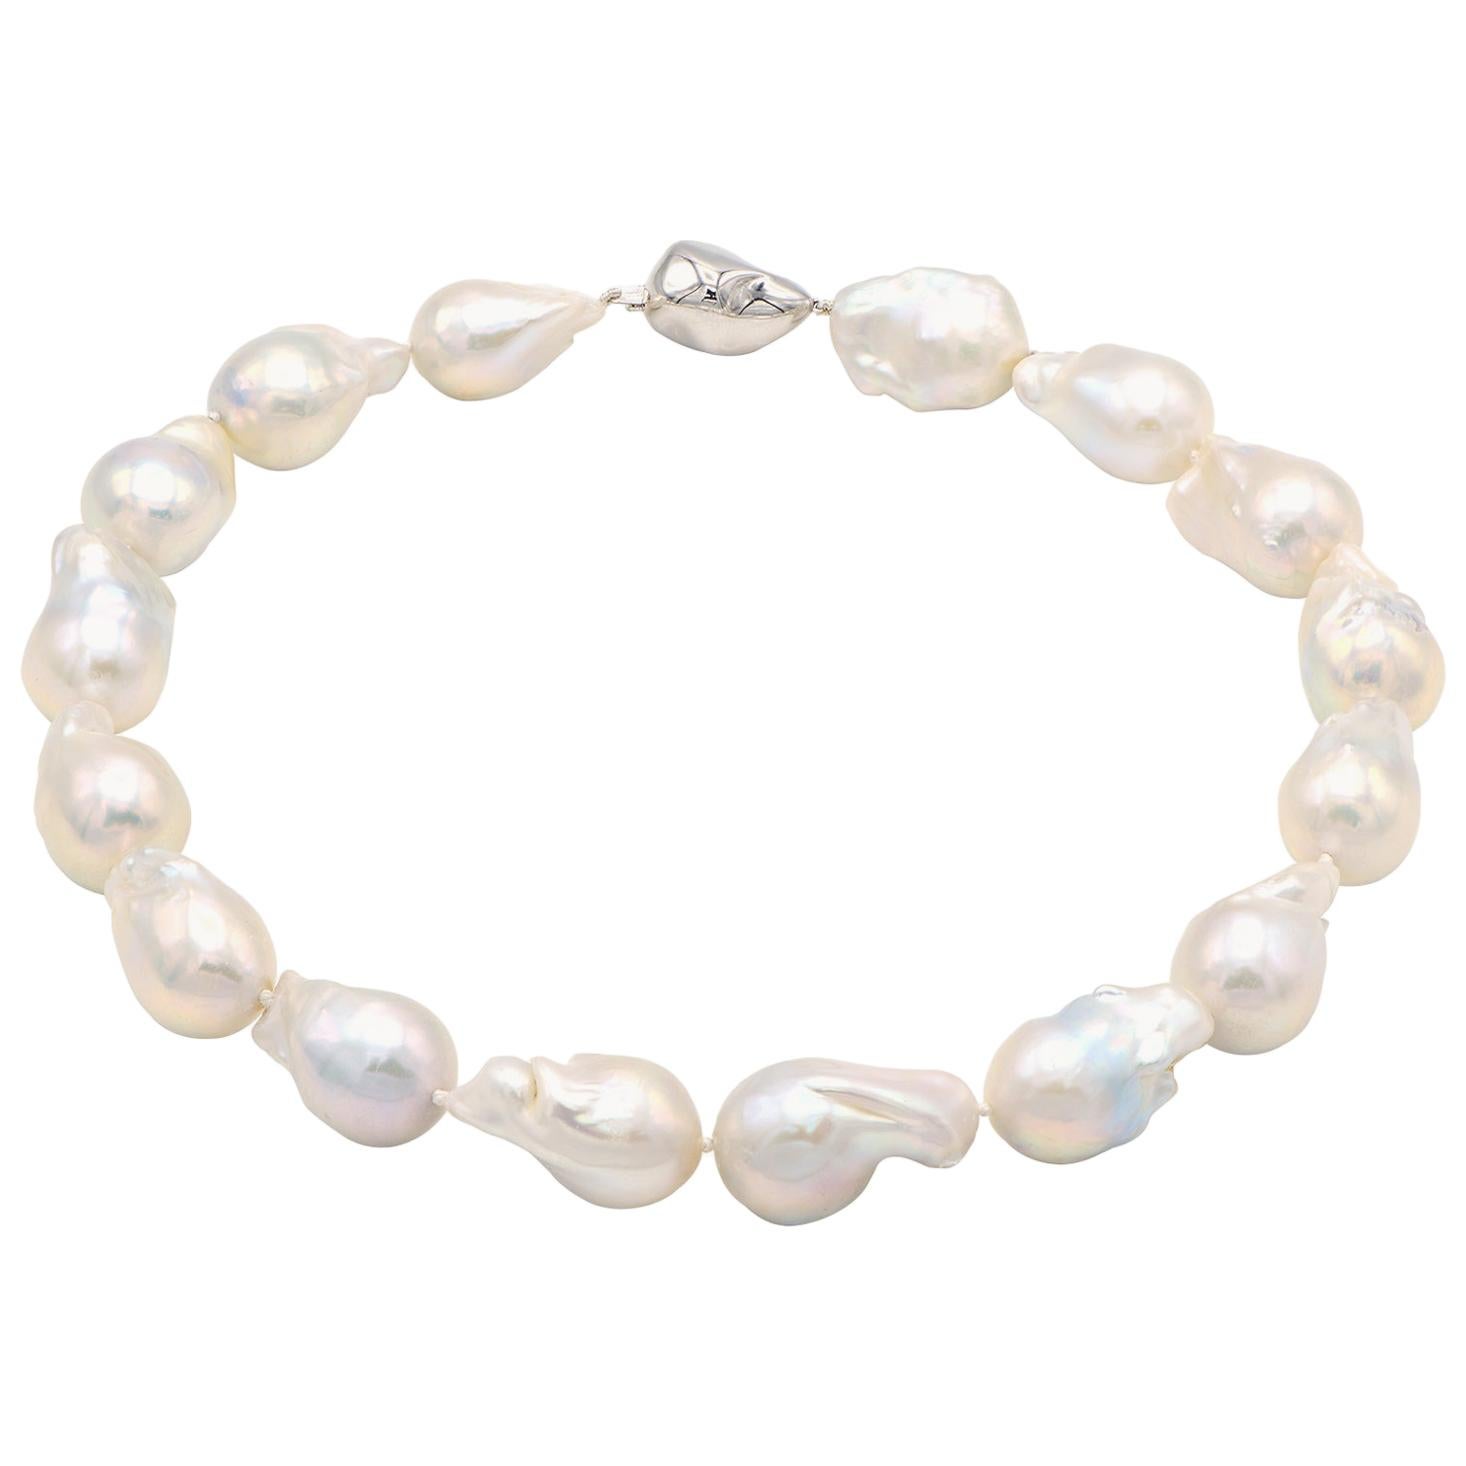 Baroque White Freshwater Pearl Necklace with 14 Karat White Gold Clasp